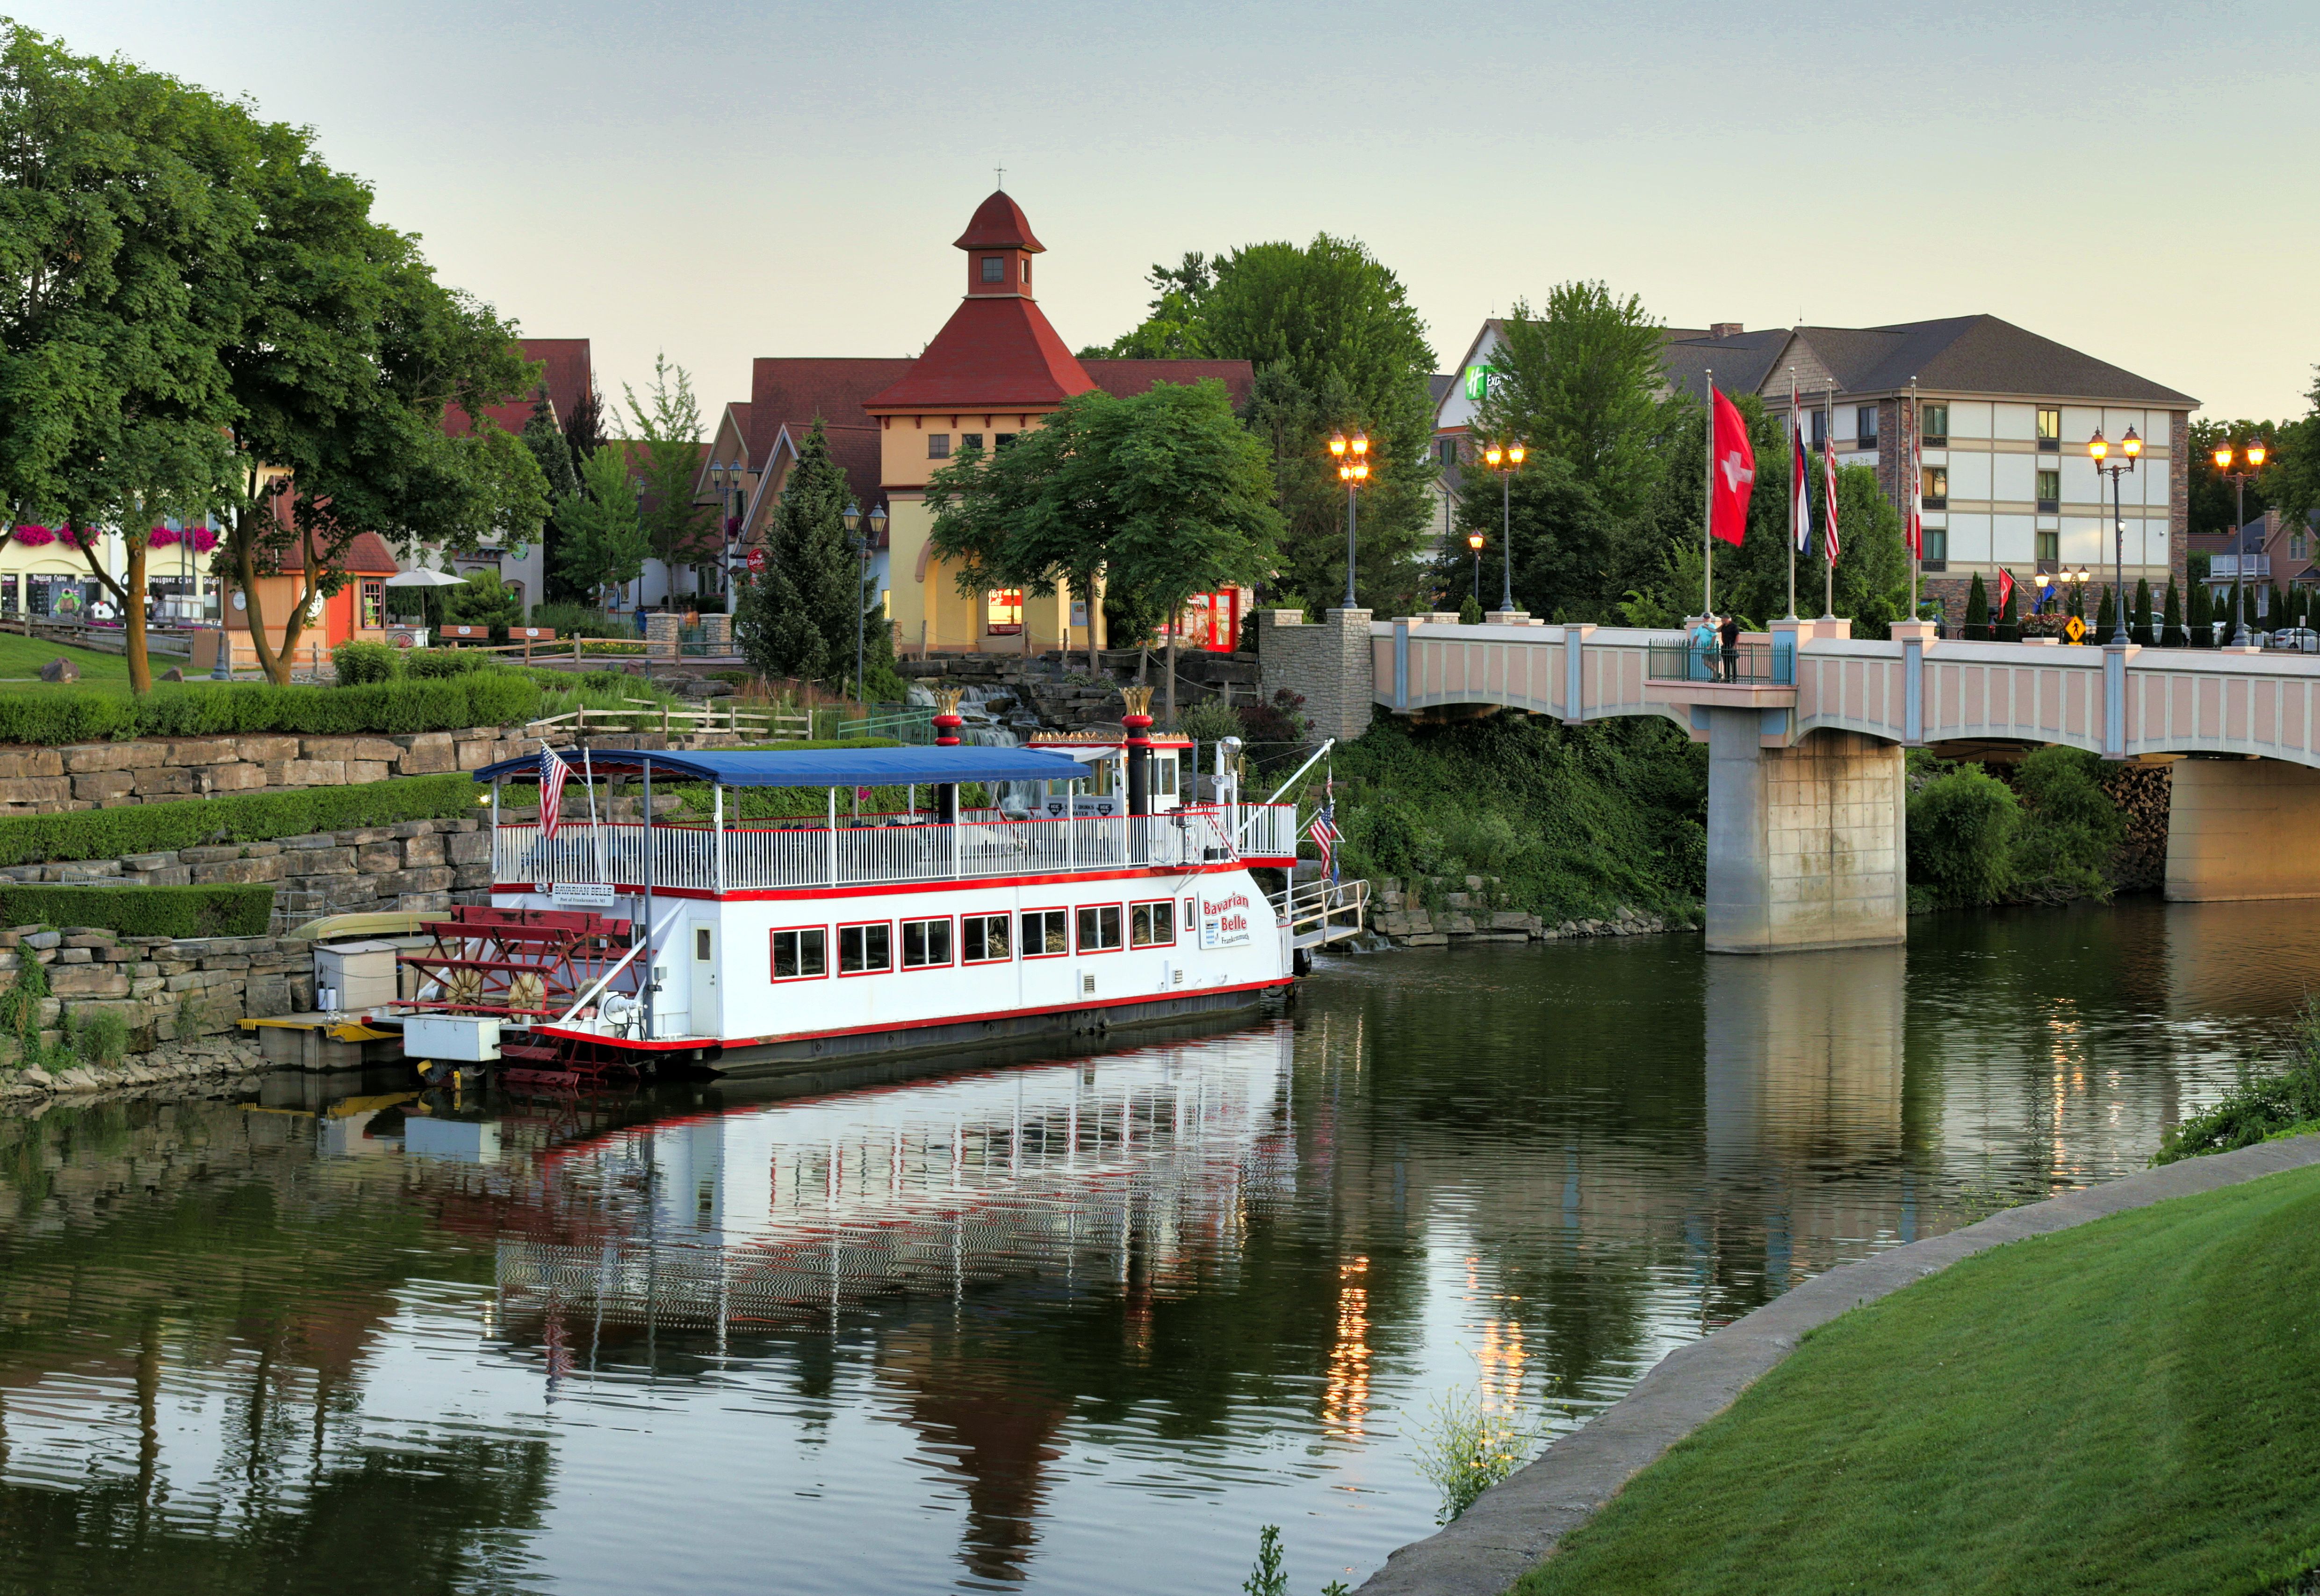 The Bavarian Belle Riverboat on Cass River